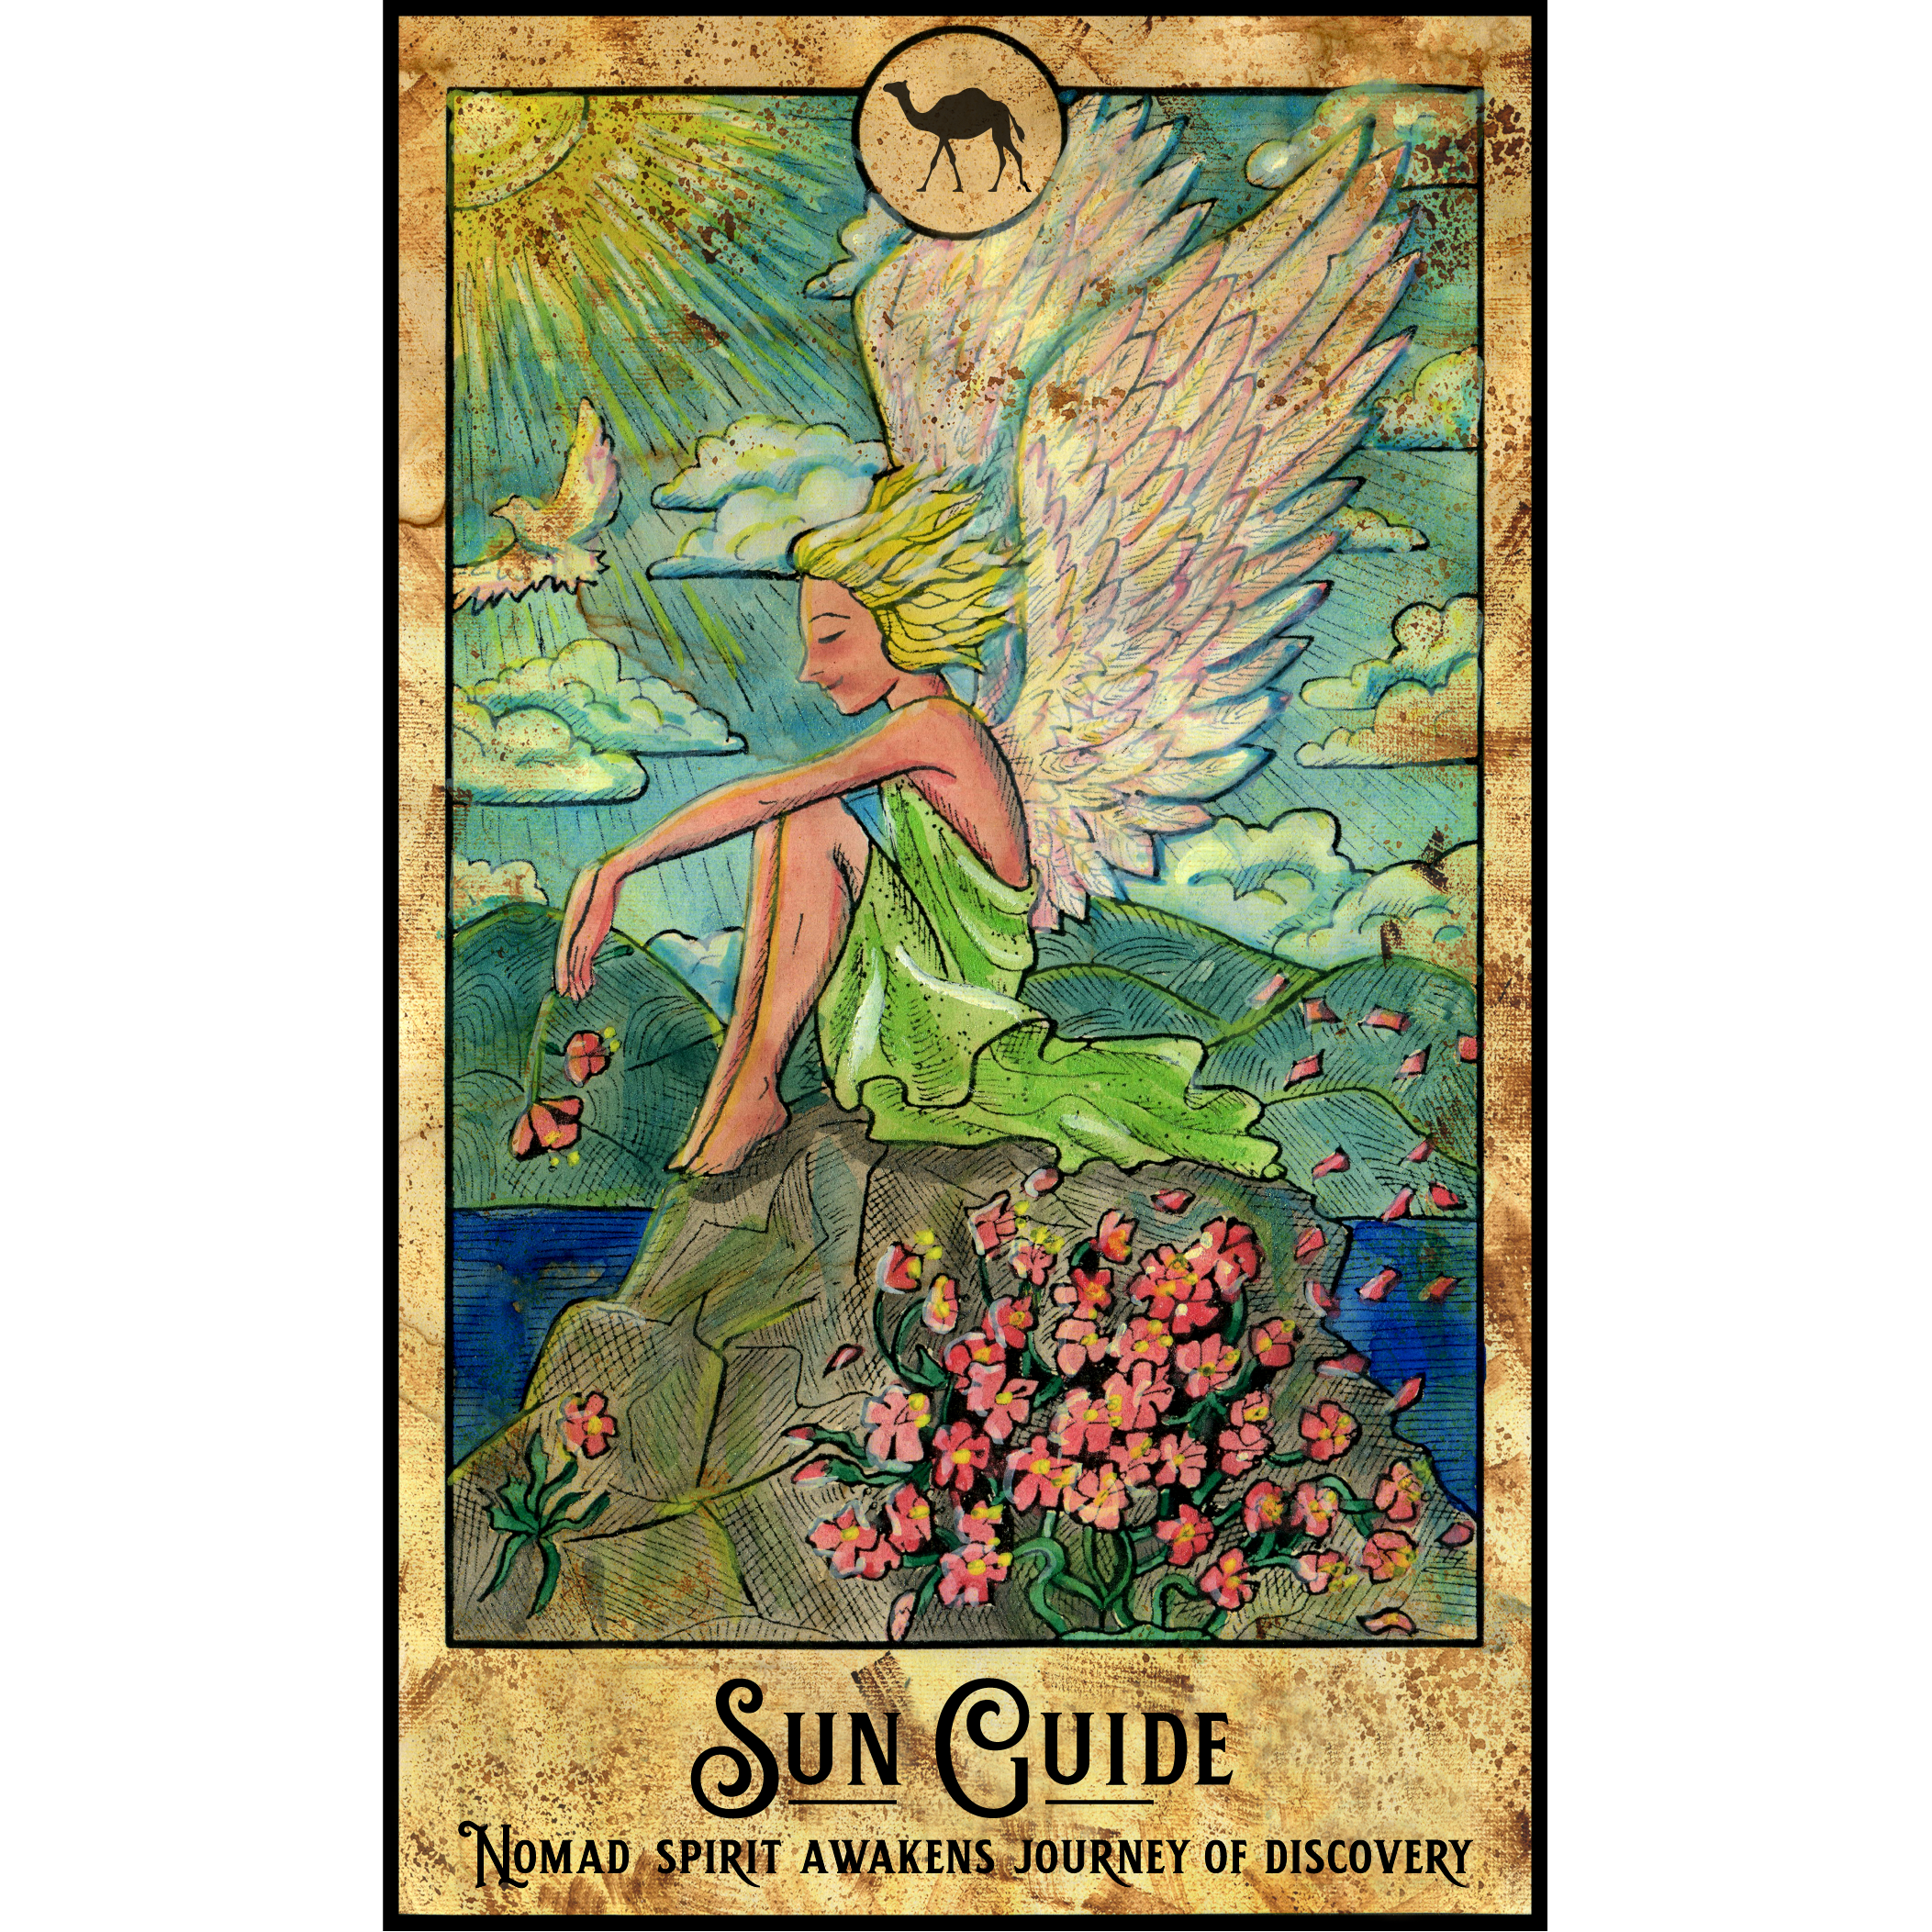 Image of artisan-designed graphic with winged nomad spirit on a mountain, with words "Sun Guide. Nomad spirit awakens journey of discovery" at bottom.